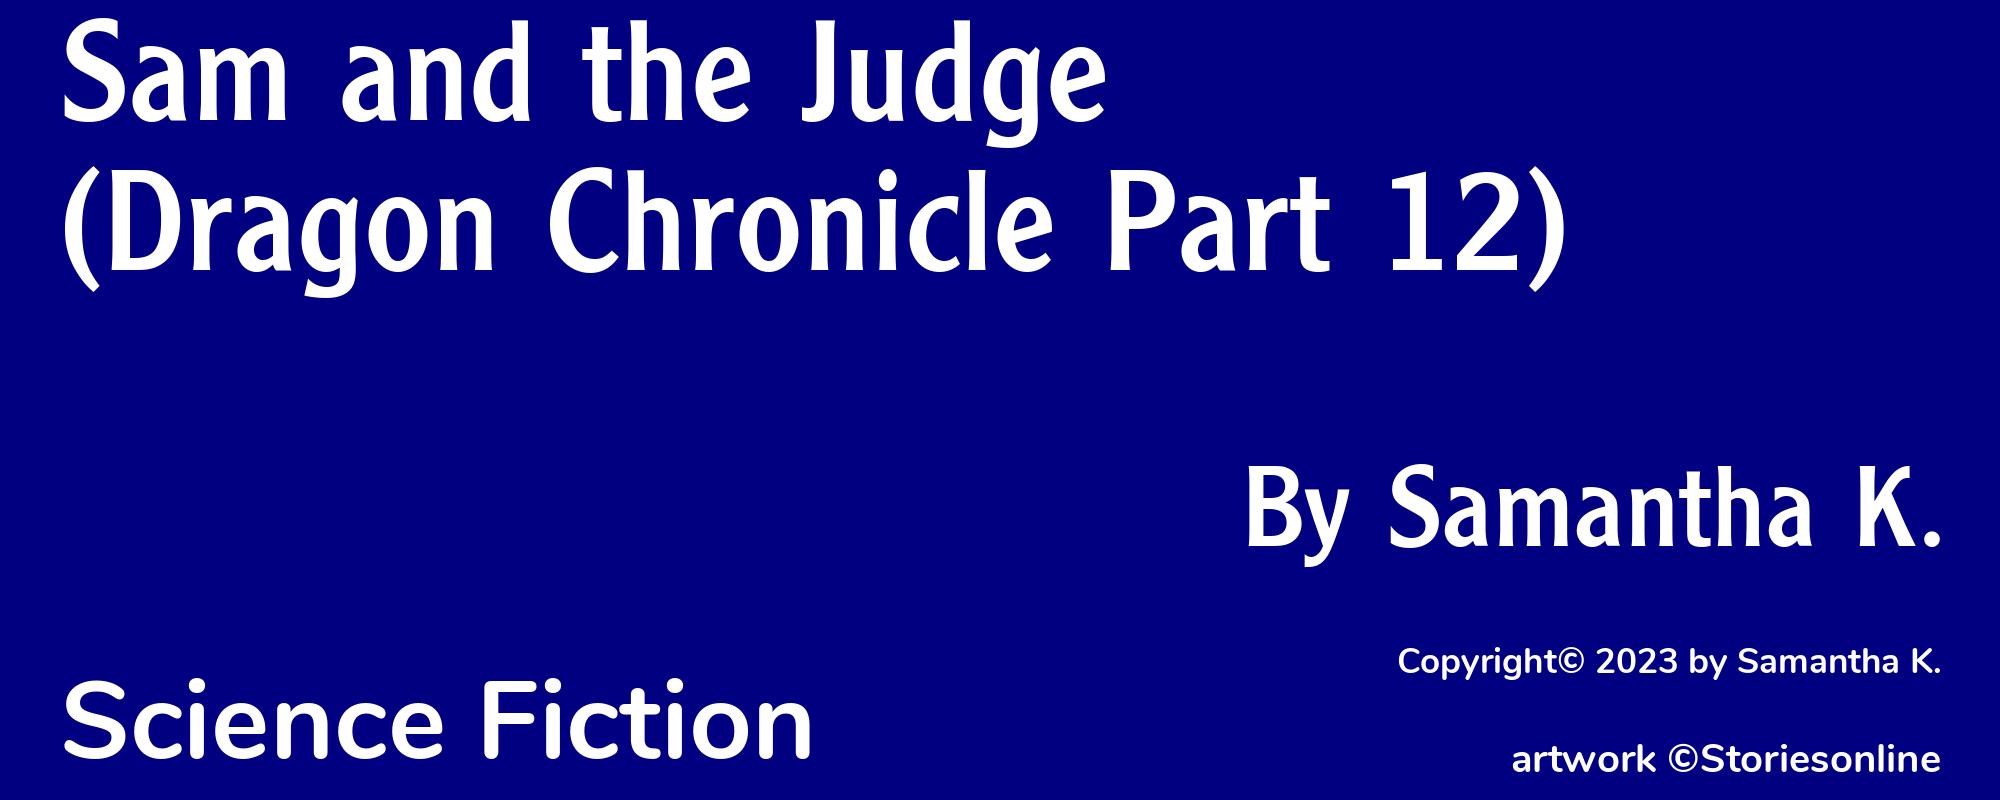 Sam and the Judge (Dragon Chronicle Part 12) - Cover